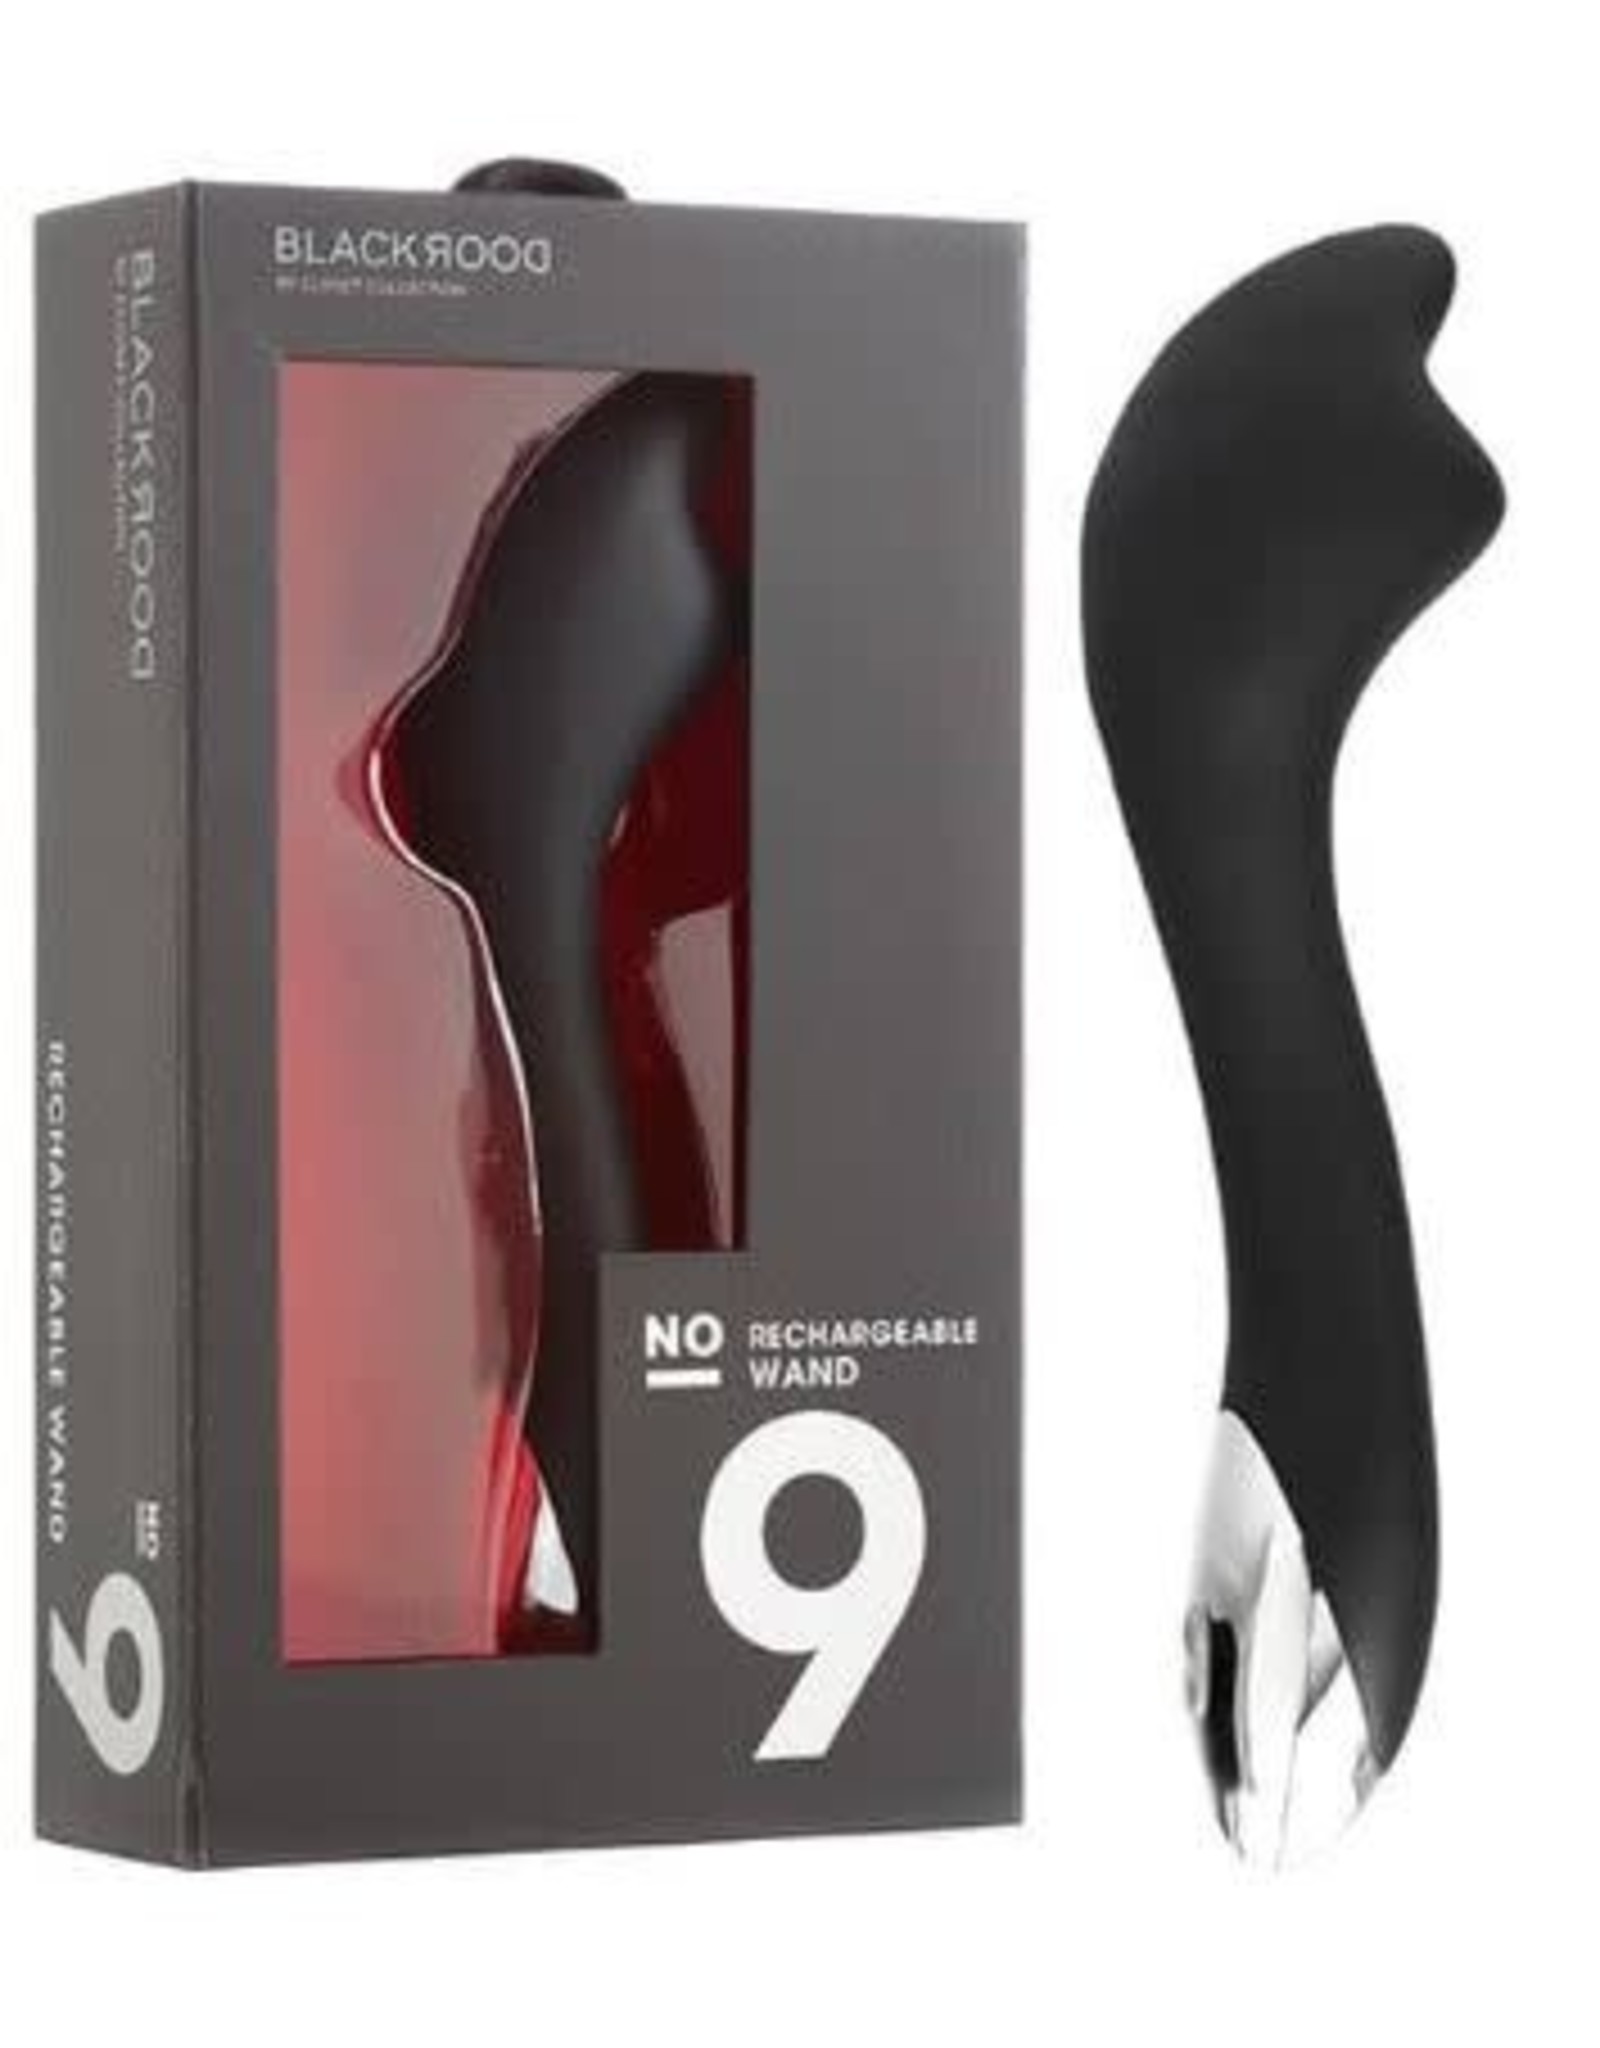 Closet Collection Closet Collection No 9 Rechargeable Wand